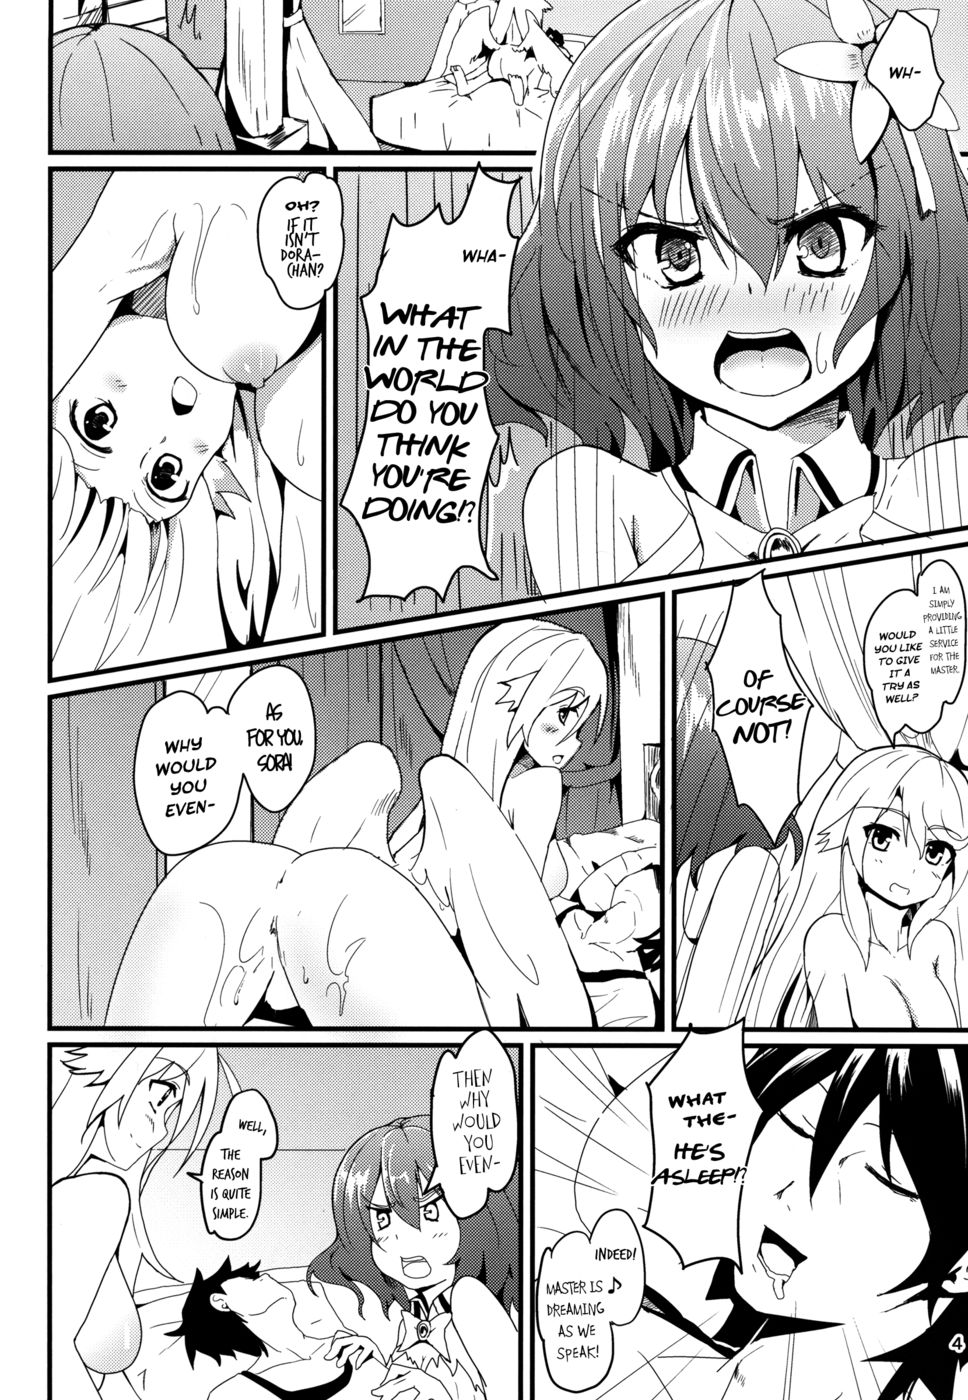 Hentai Manga Comic-Jibril and Steph's Attempt at Service!-Read-4